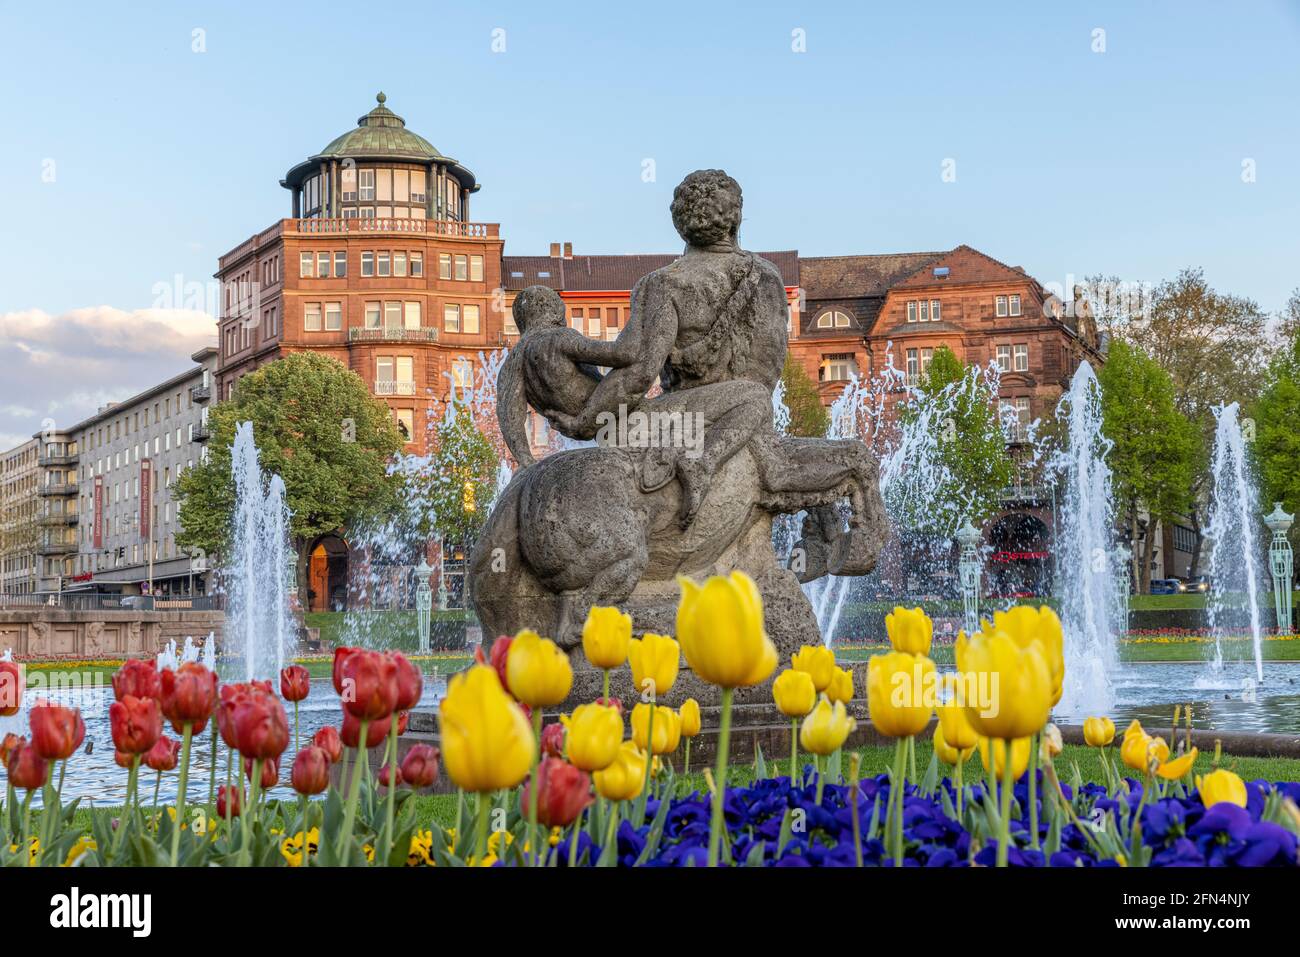 Mannheim Rosengarten formal garden is an absolute beautiful place in city. People gather there to have picnics and hang around with friends. Stock Photo